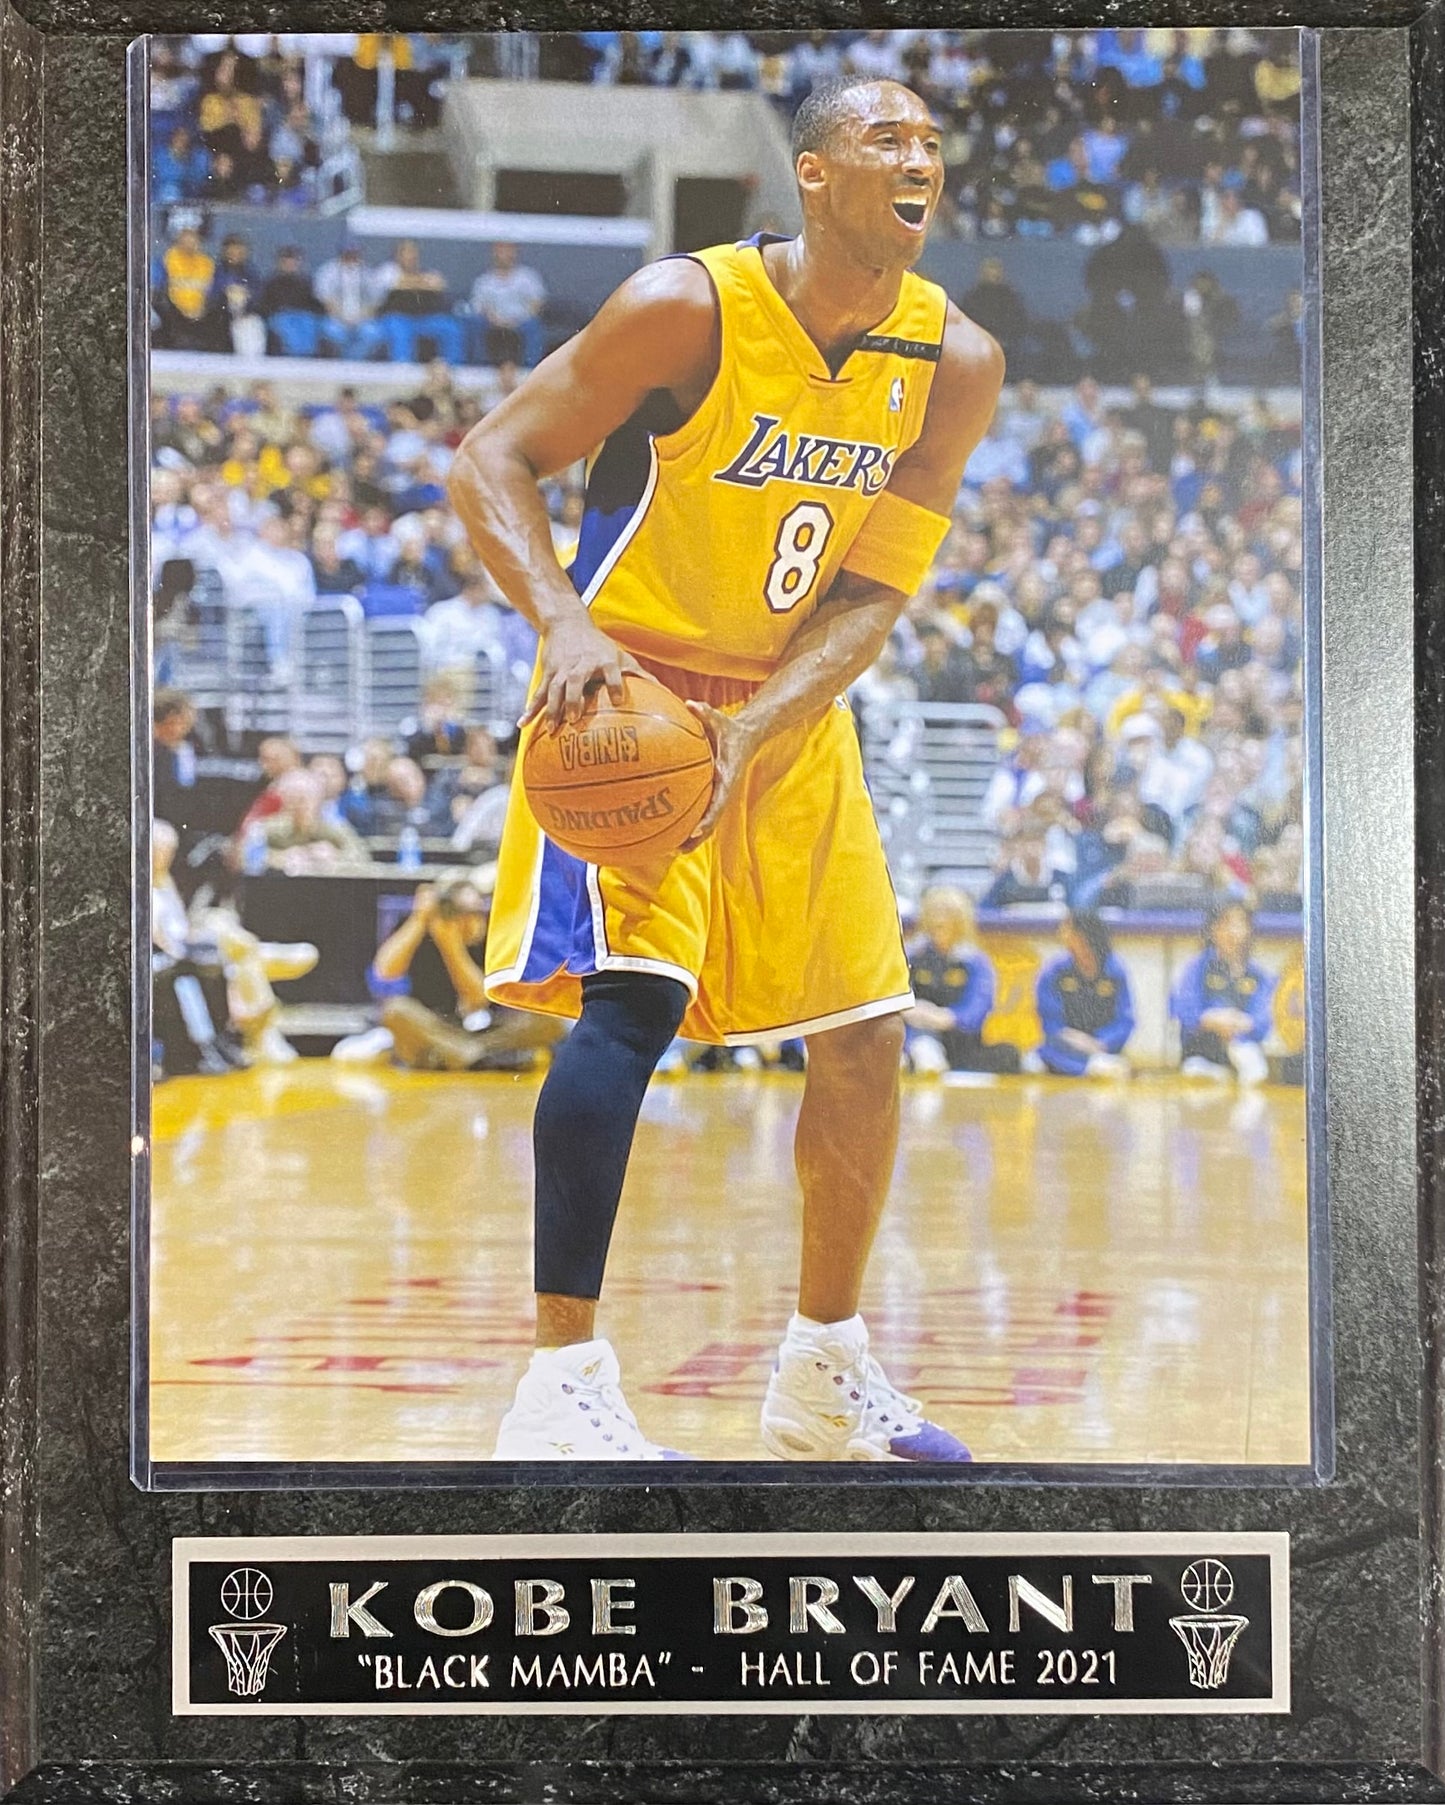 Kobe Bryant "Black Mamba" Los Angeles Lakers Hall of Fame 2021 Wall Plaque